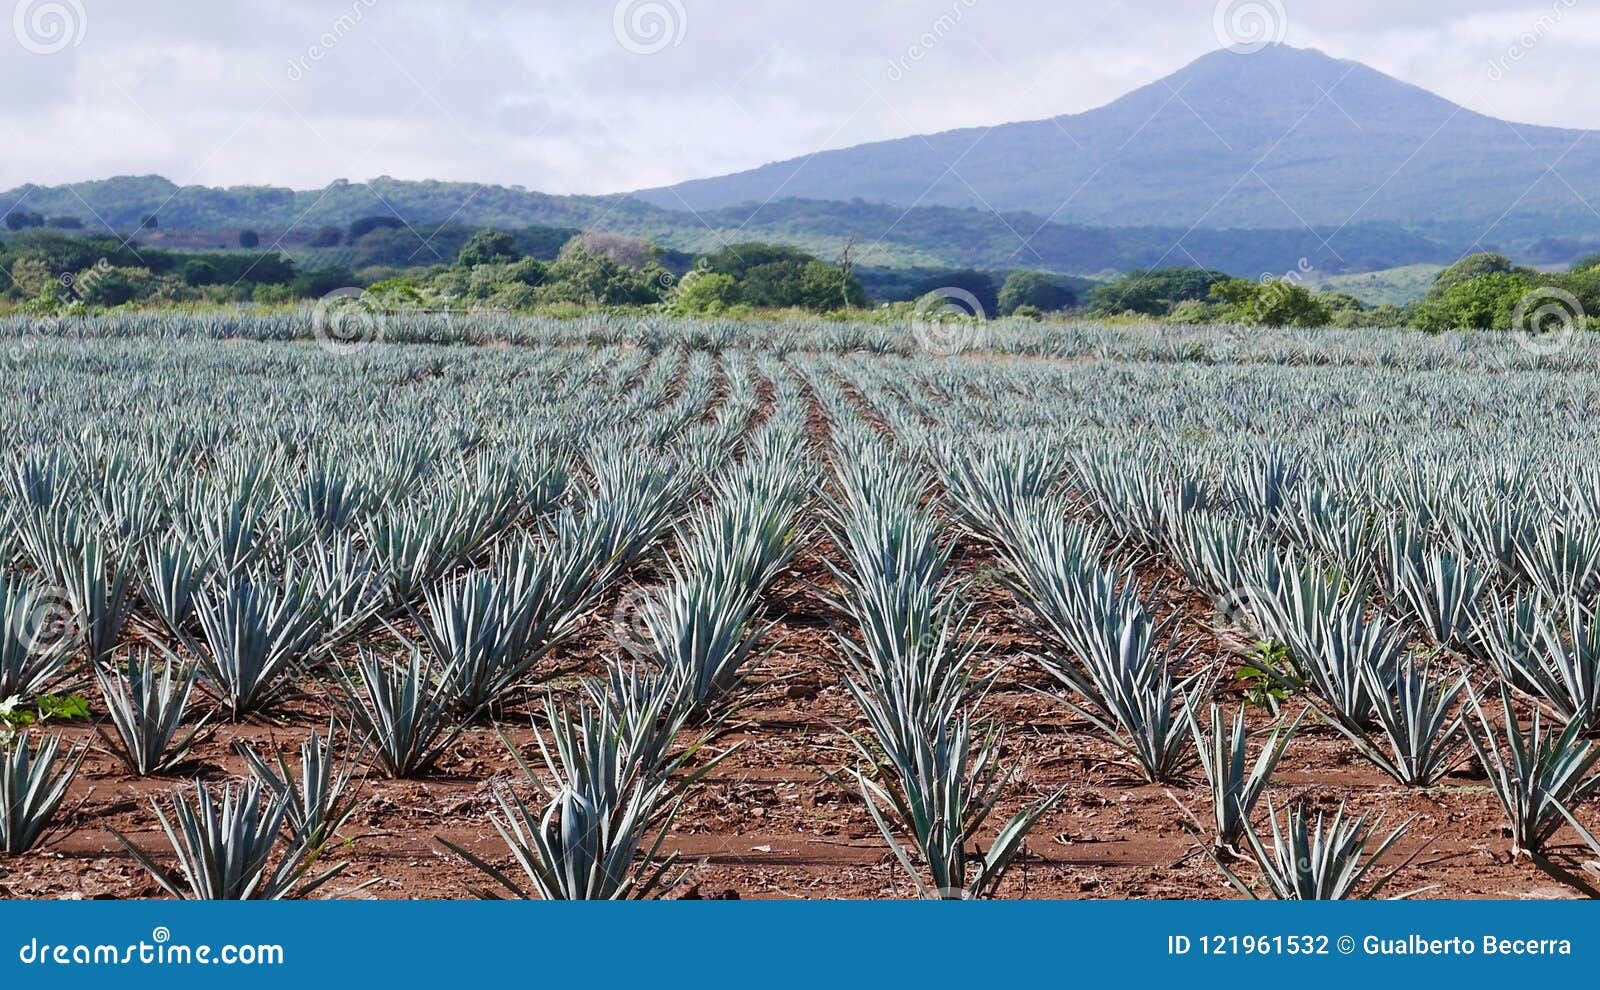 view of a blue agave field